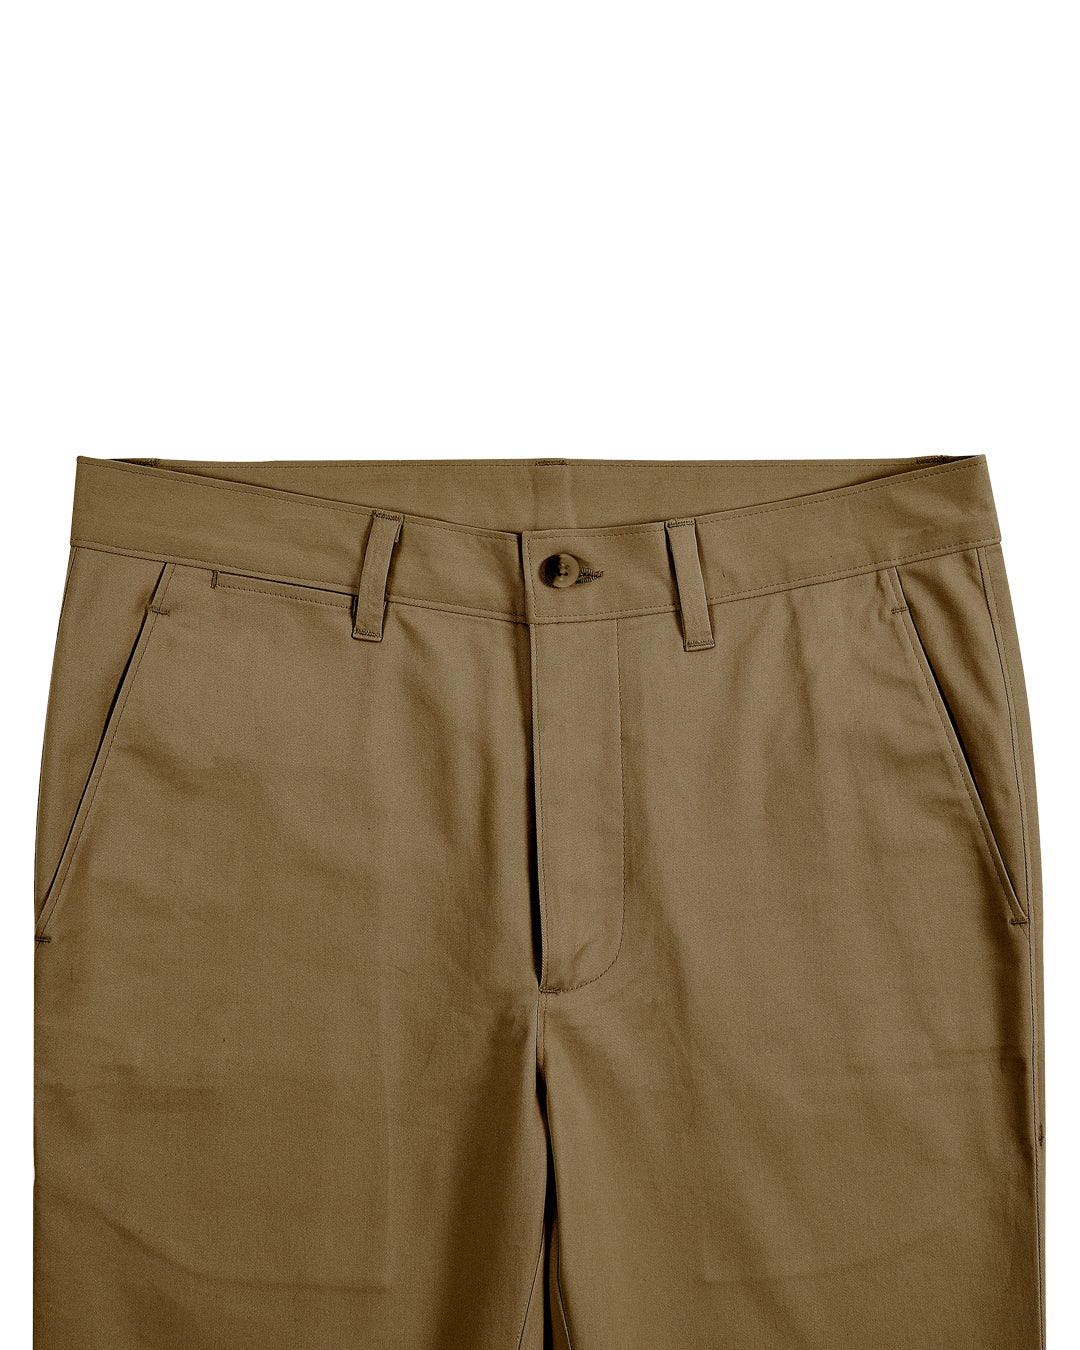 Front view of custom Genoa Chino pants for men by Luxire in copper